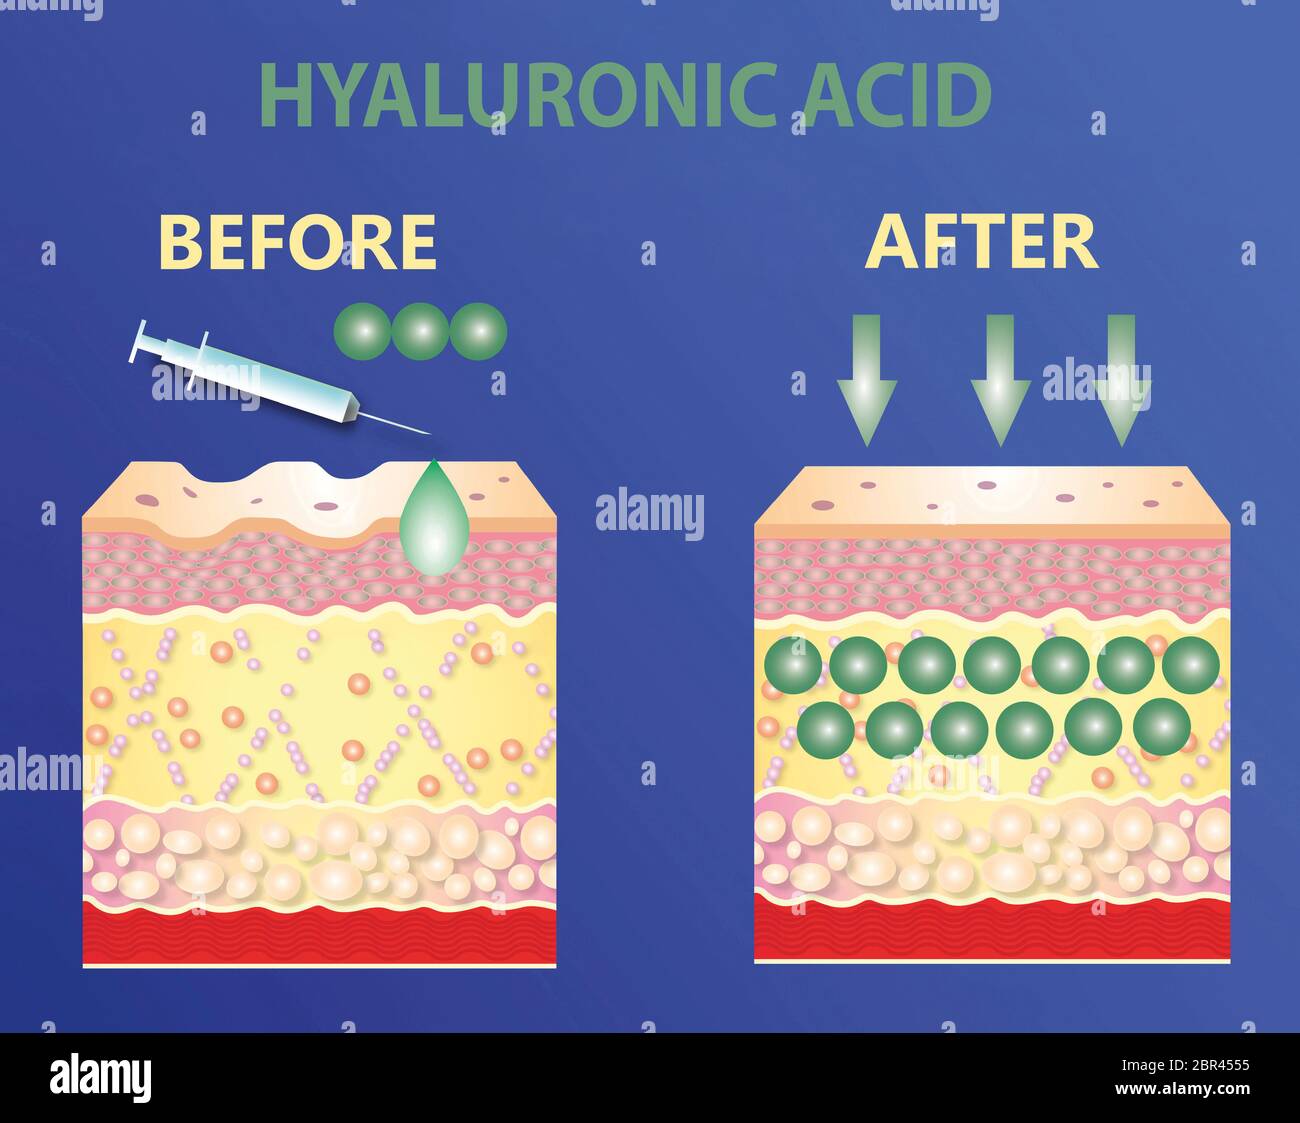 Hyaluronic acid. skin-care products. skin rejuvenation with help of hyaluronic acid. Lifting by filler concept Stock Photo